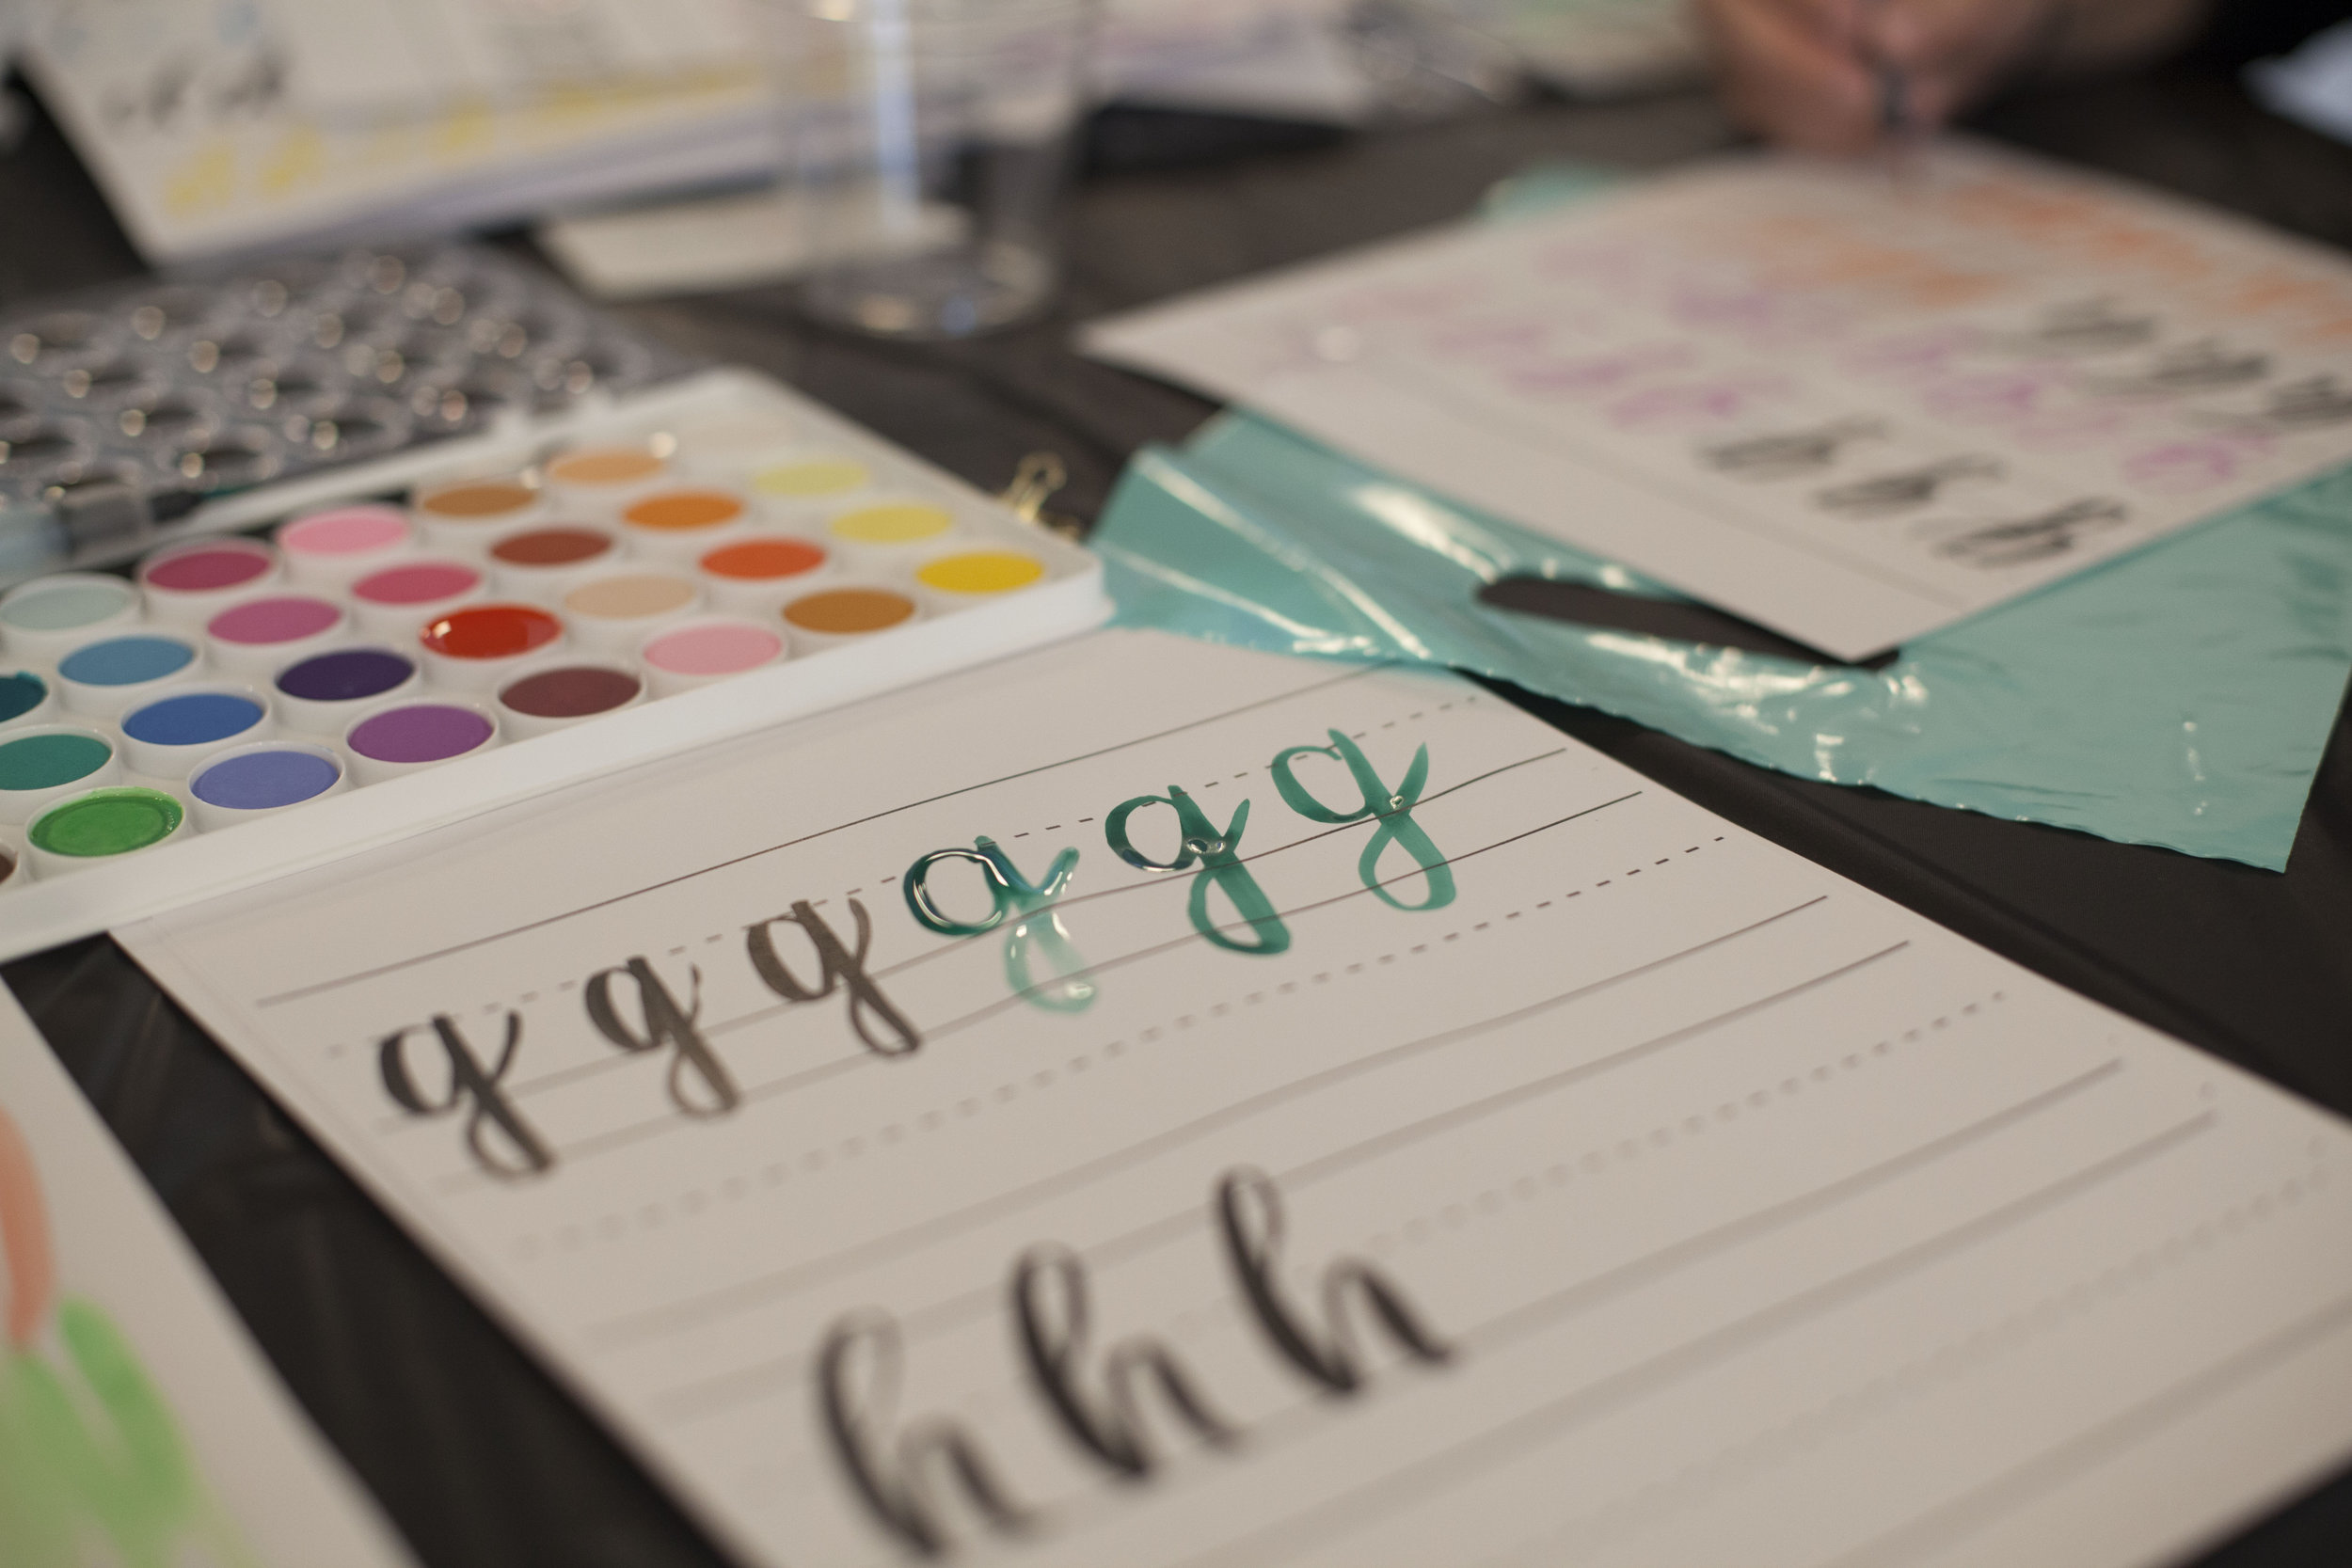 Day 62 - Calligraphy Workshop